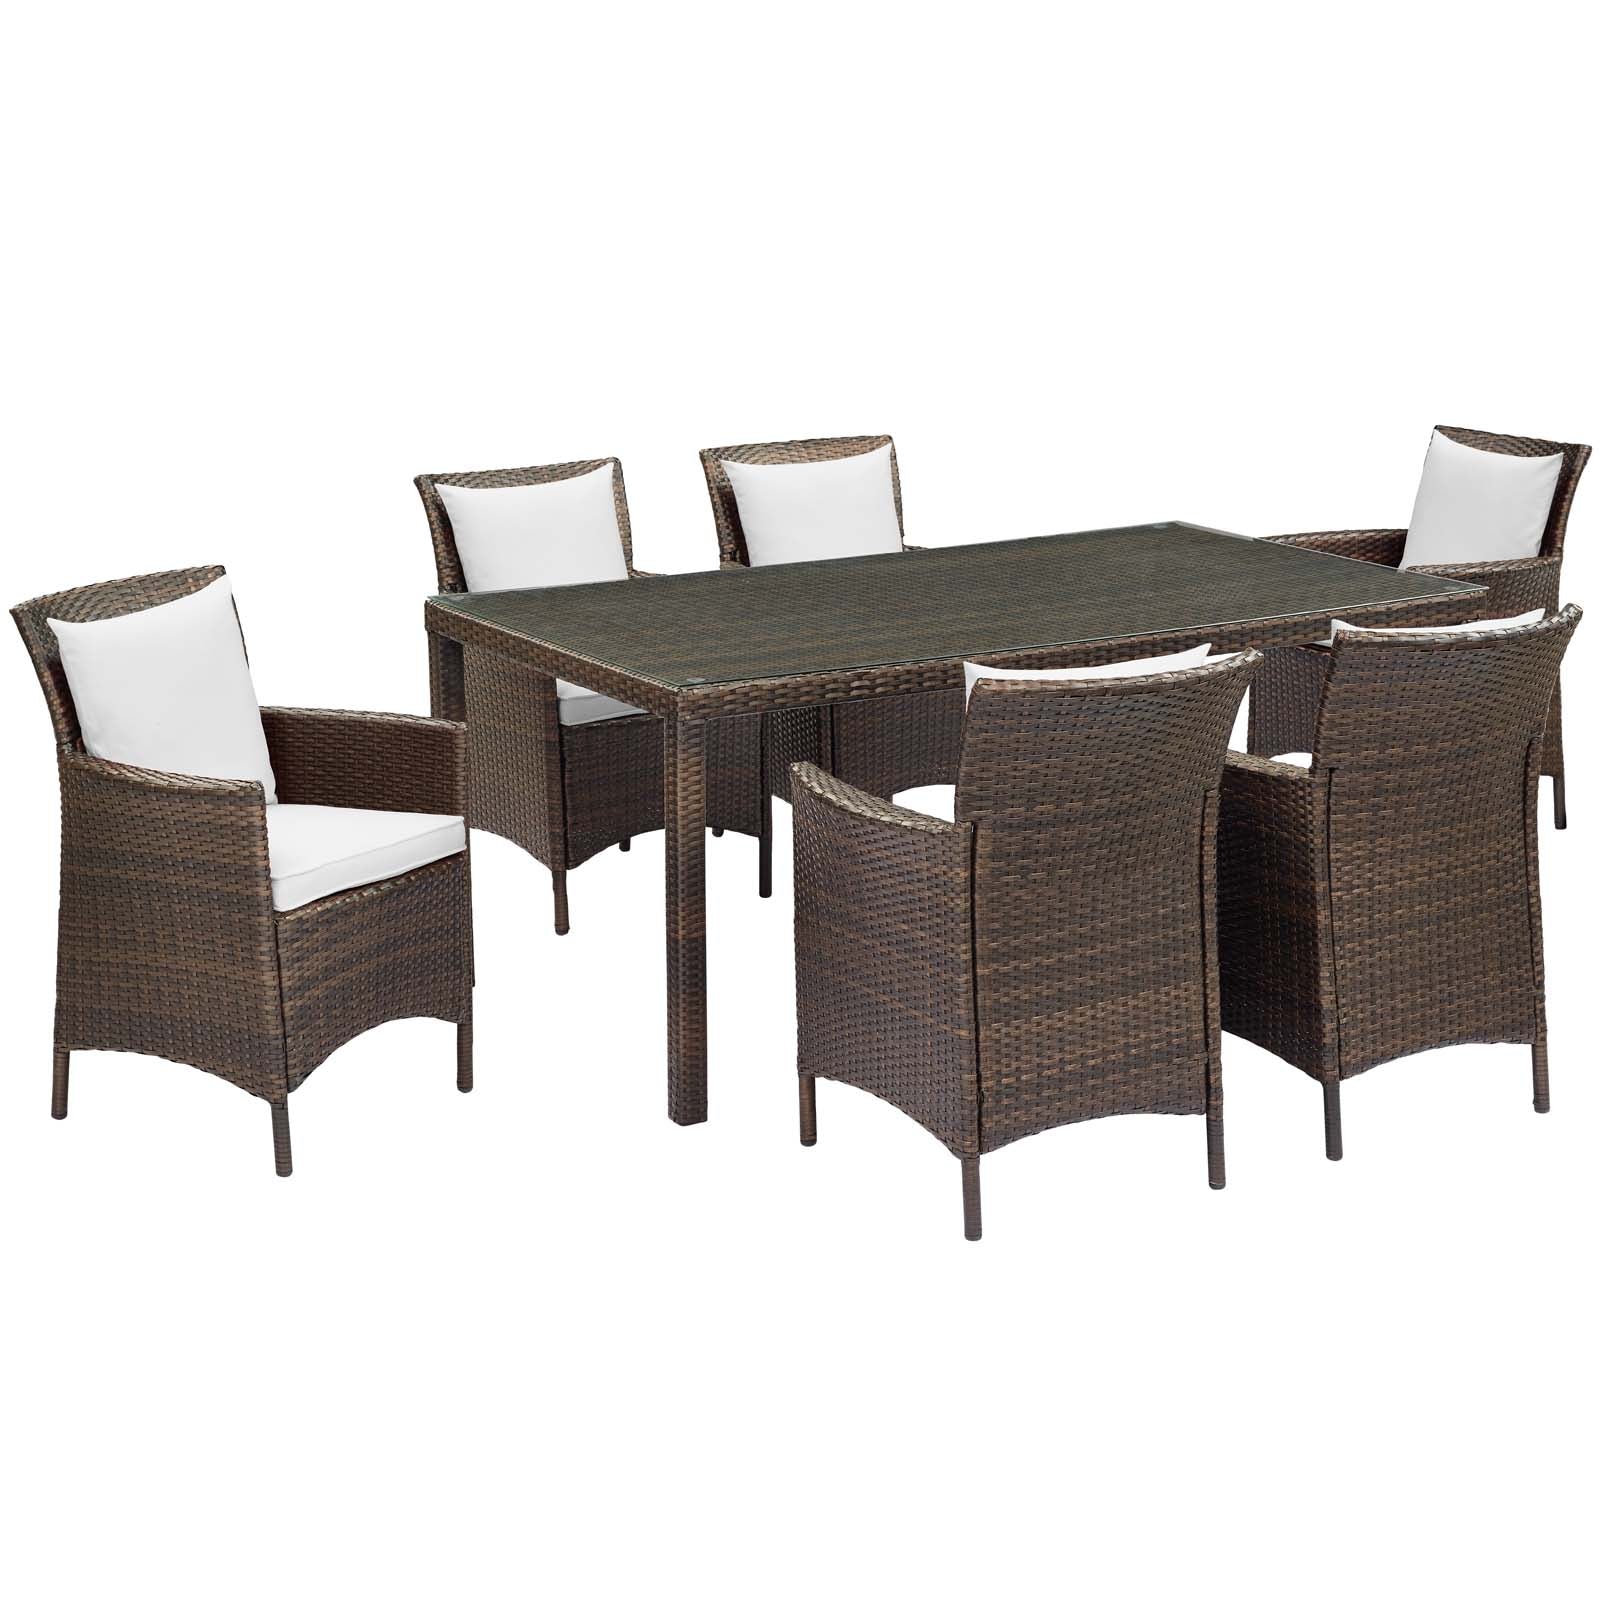 Modway Outdoor Dining Sets - Conduit 7 Piece Outdoor Patio Wicker Rattan Dining Set Brown White